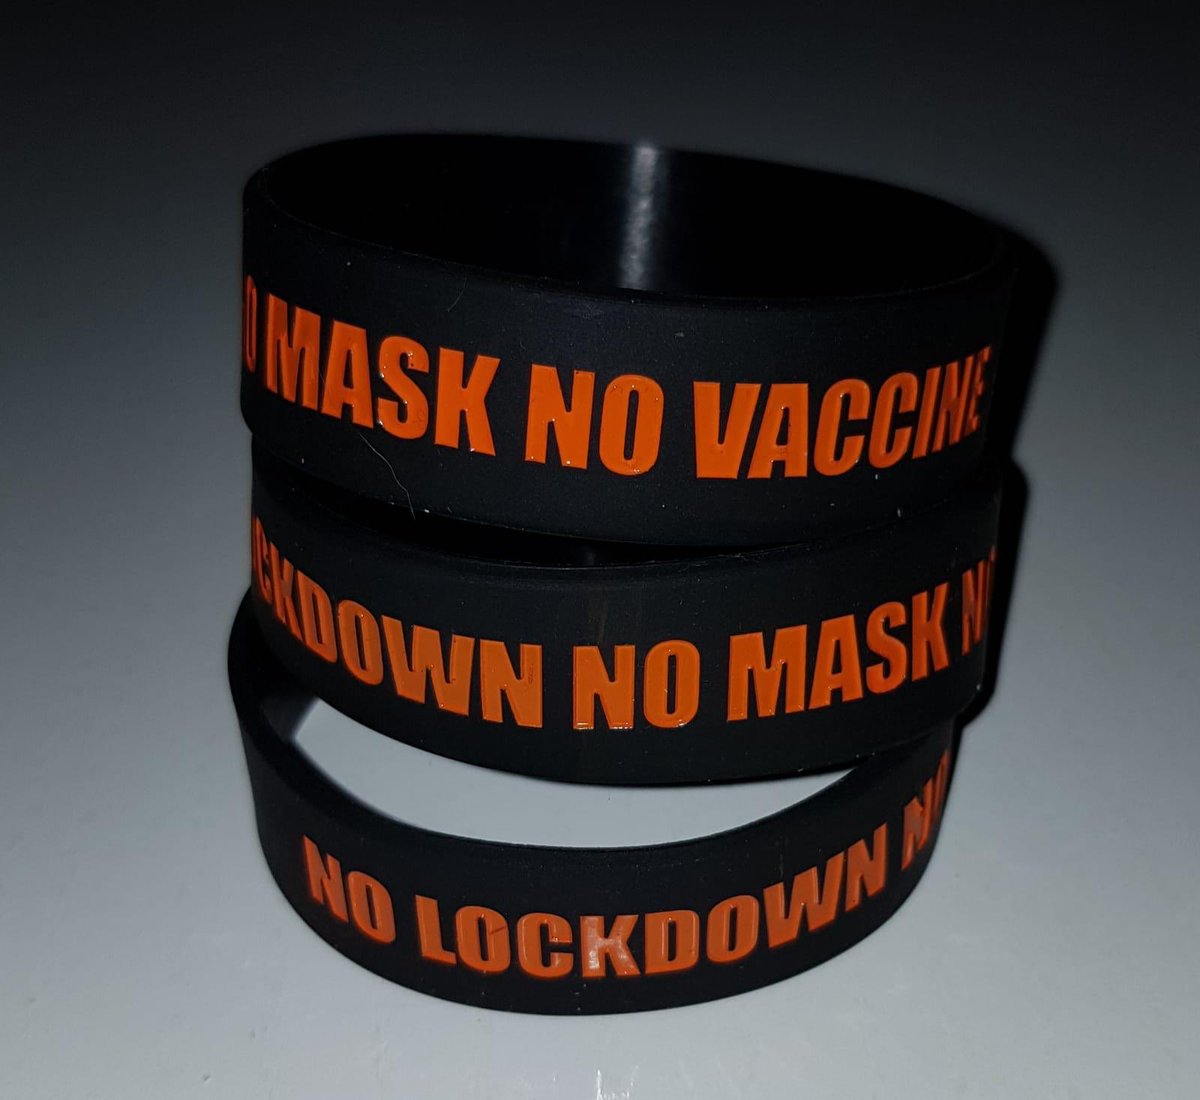 We now have No Mask, No Vaccine, No Lockdowns wristbands available for sale. Selling tomorrow at London March for 2.99 each or 2 for £5 OR with 1 delivered it’s 5 each or 2 for £8 delivered 🧡 easily identify yourself with fellow truth seekers 🌟